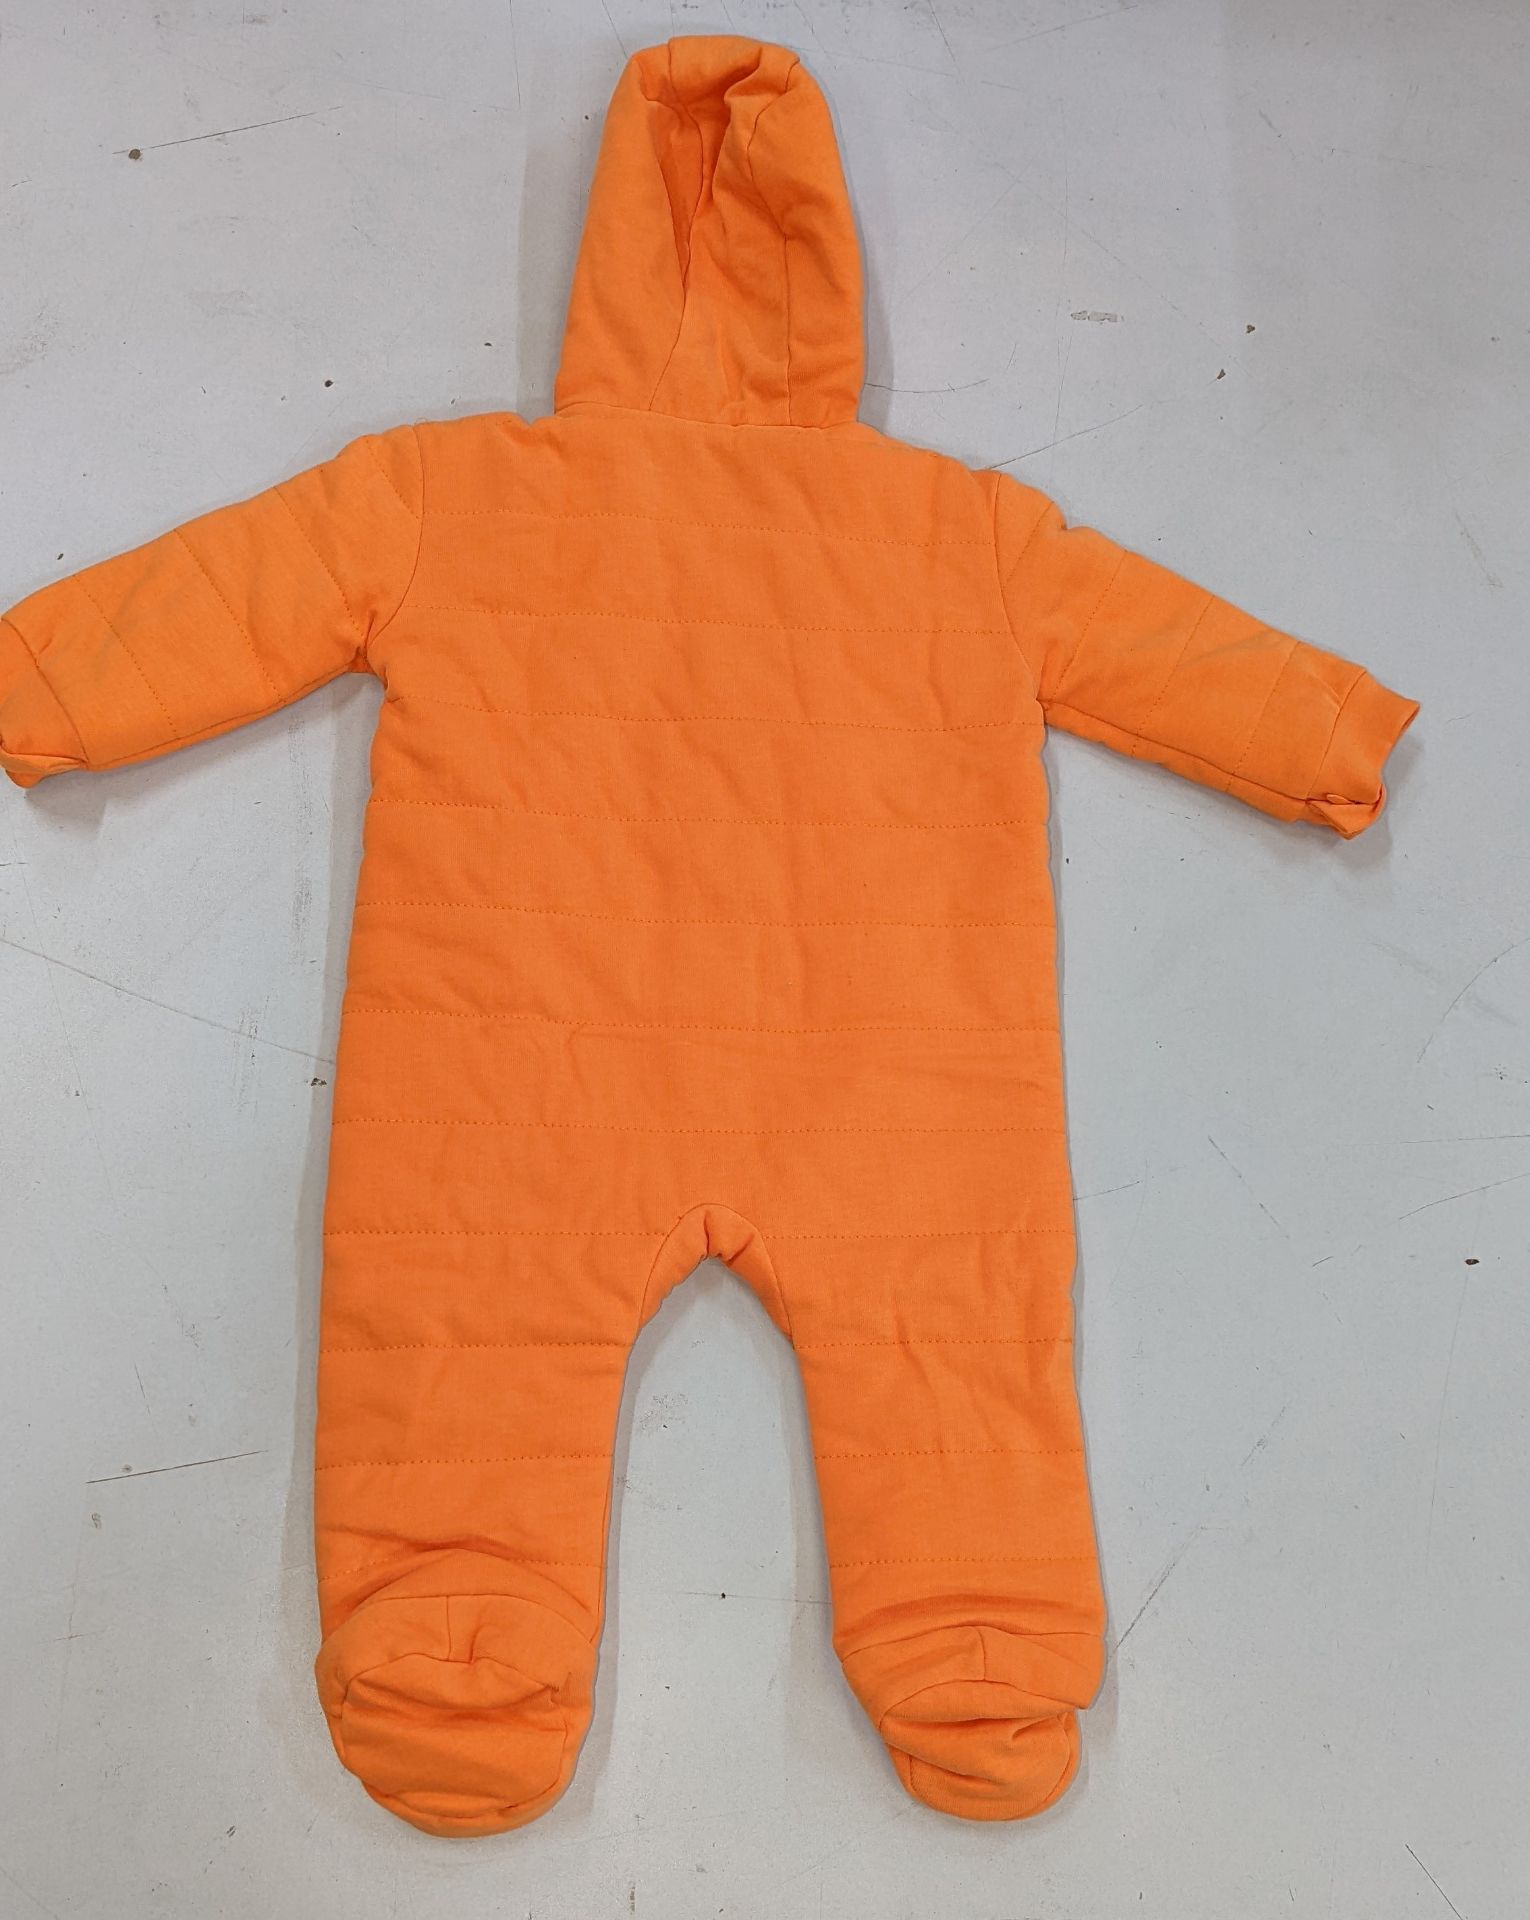 16 off Mosé Baby unisex orange romper body suits, in 100% cotton with Mosé Baby print lining. Age 0 - Image 10 of 10